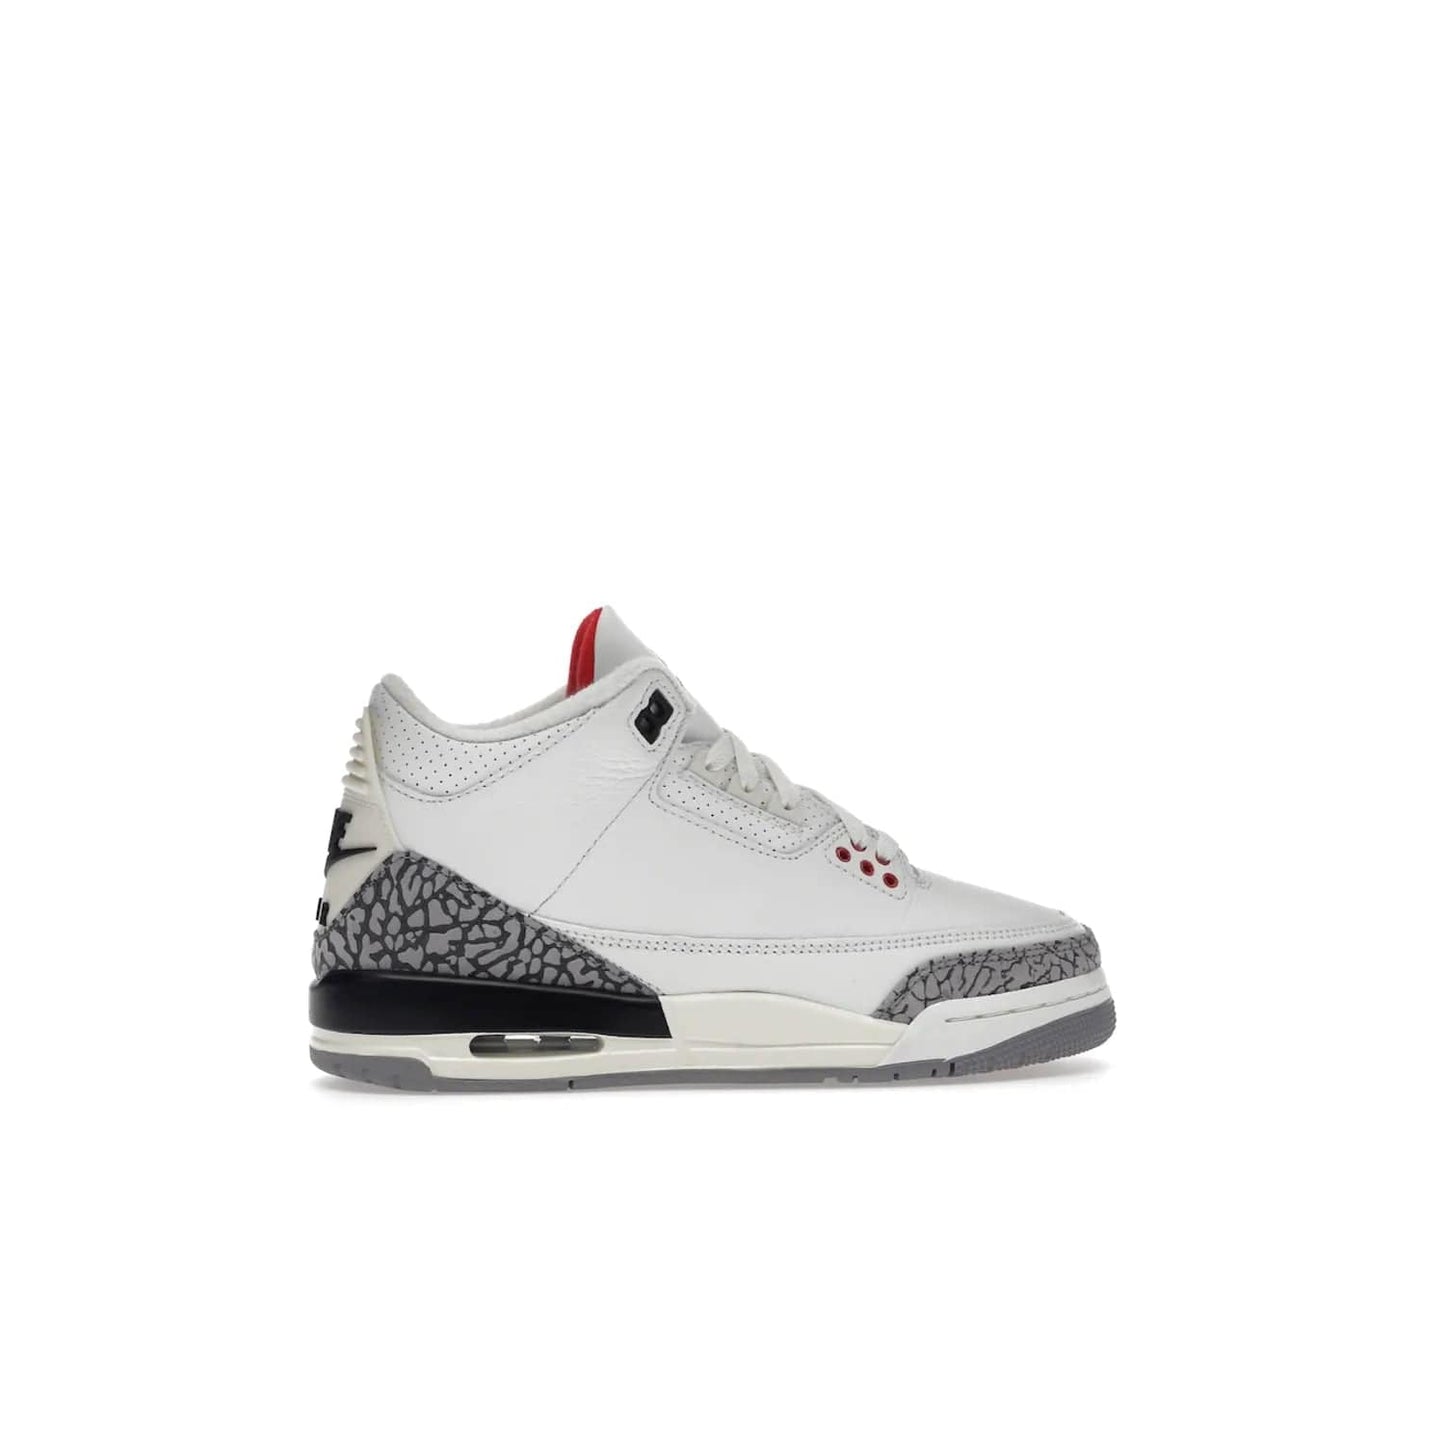 Jordan 3 Retro White Cement Reimagined (GS) - Image 36 - Only at www.BallersClubKickz.com - Grab the perfect blend of modern design and classic style with the Jordan 3 Retro White Cement Reimagined (GS). Features Summit White, Fire Red, Black, and Cement Grey colorway, iconic Jordan logo embroidered on the tongue, and “Nike Air” branding. Limited availability, get your pair before March 11th 2023.